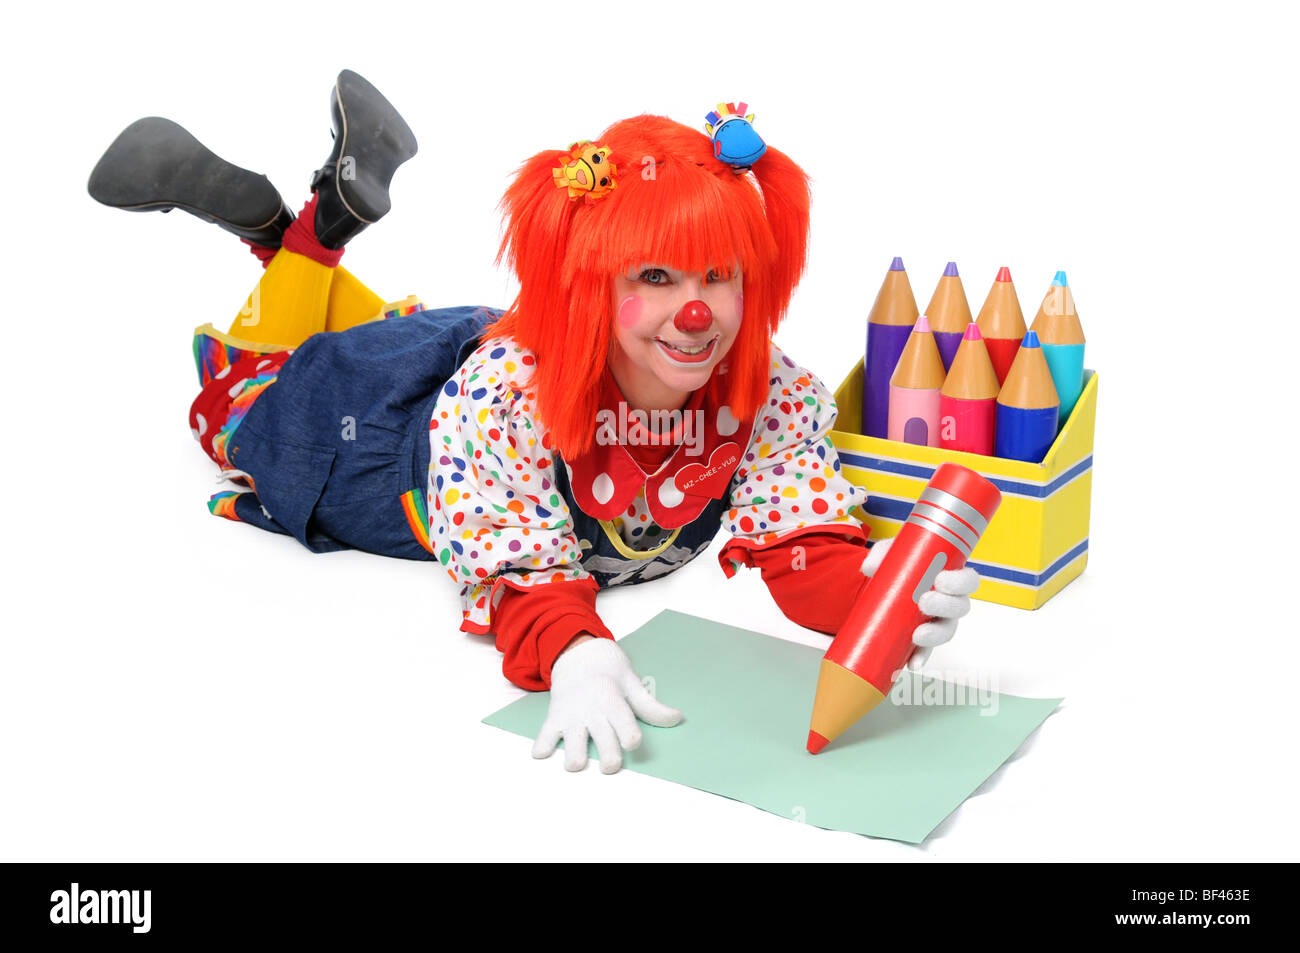 Clown laying down on the floor and writing with large color pencils Stock Photo